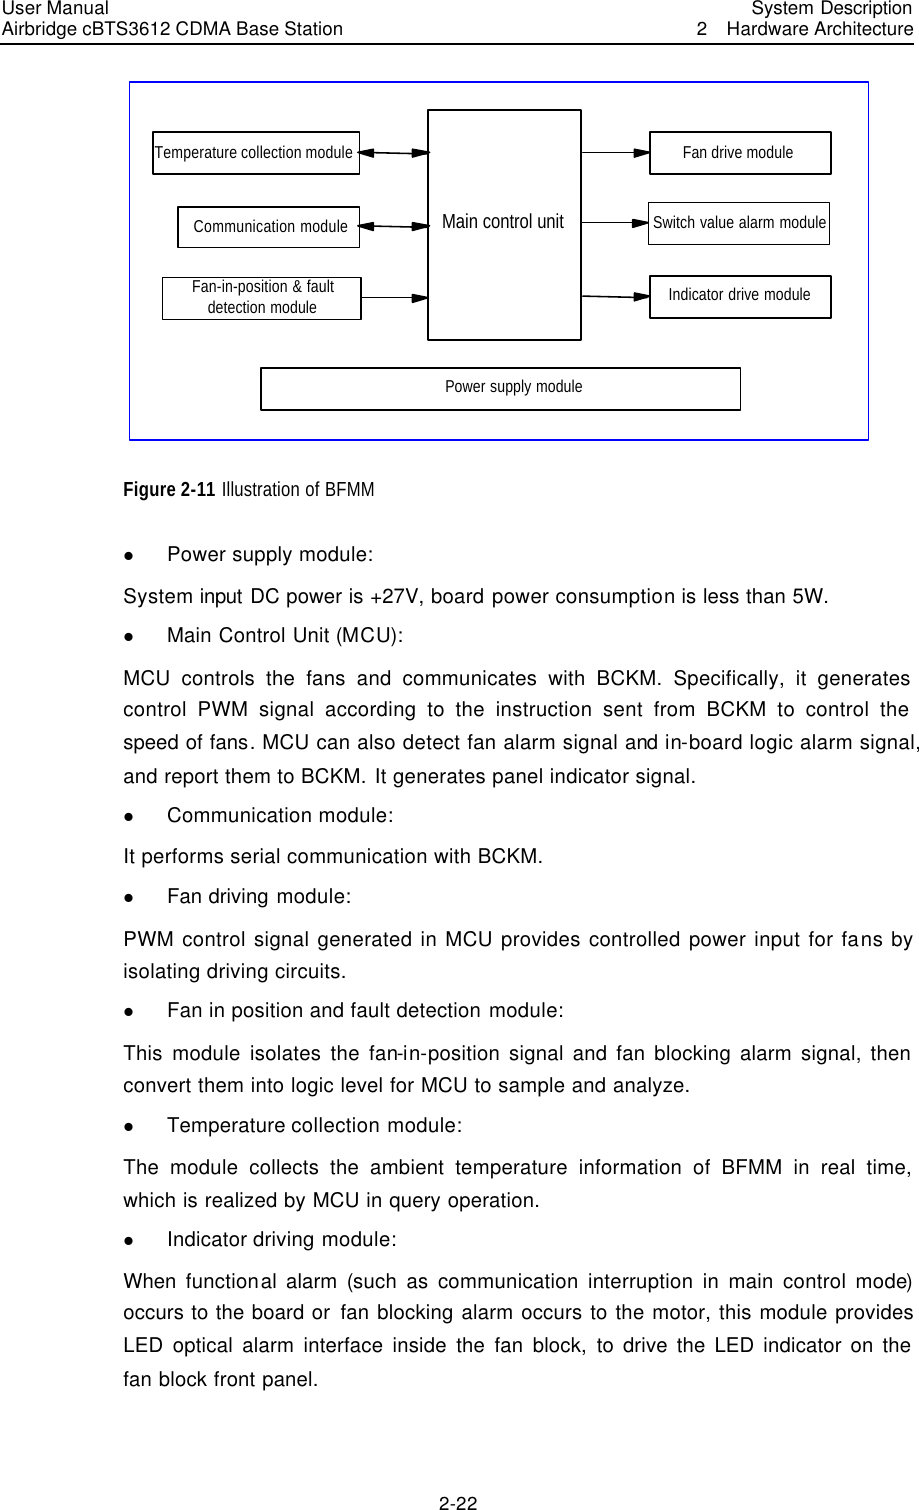 User Manual Airbridge cBTS3612 CDMA Base Station   System Description2  Hardware Architecture 2-22 Main control unitPower supply moduleTemperature collection moduleCommunication moduleFan-in-position &amp; faultdetection moduleFan drive moduleSwitch value alarm moduleIndicator drive module Figure 2-11 Illustration of BFMM   l Power supply module:   System input DC power is +27V, board power consumption is less than 5W.   l Main Control Unit (MCU):   MCU controls the fans and communicates with BCKM. Specifically, it generates control PWM signal according to the instruction sent from BCKM to control the speed of fans. MCU can also detect fan alarm signal and in-board logic alarm signal, and report them to BCKM. It generates panel indicator signal.   l Communication module:   It performs serial communication with BCKM. l Fan driving module:   PWM control signal generated in MCU provides controlled power input for fans by isolating driving circuits. l Fan in position and fault detection module:   This module isolates the fan-in-position signal and fan blocking alarm signal, then convert them into logic level for MCU to sample and analyze. l Temperature collection module:     The module collects the ambient temperature information of BFMM in real time, which is realized by MCU in query operation.     l Indicator driving module:   When  functional alarm (such as communication interruption in main control mode) occurs to the board or fan blocking alarm occurs to the motor, this module provides LED optical alarm interface inside the fan block, to drive the LED indicator on the fan block front panel.  